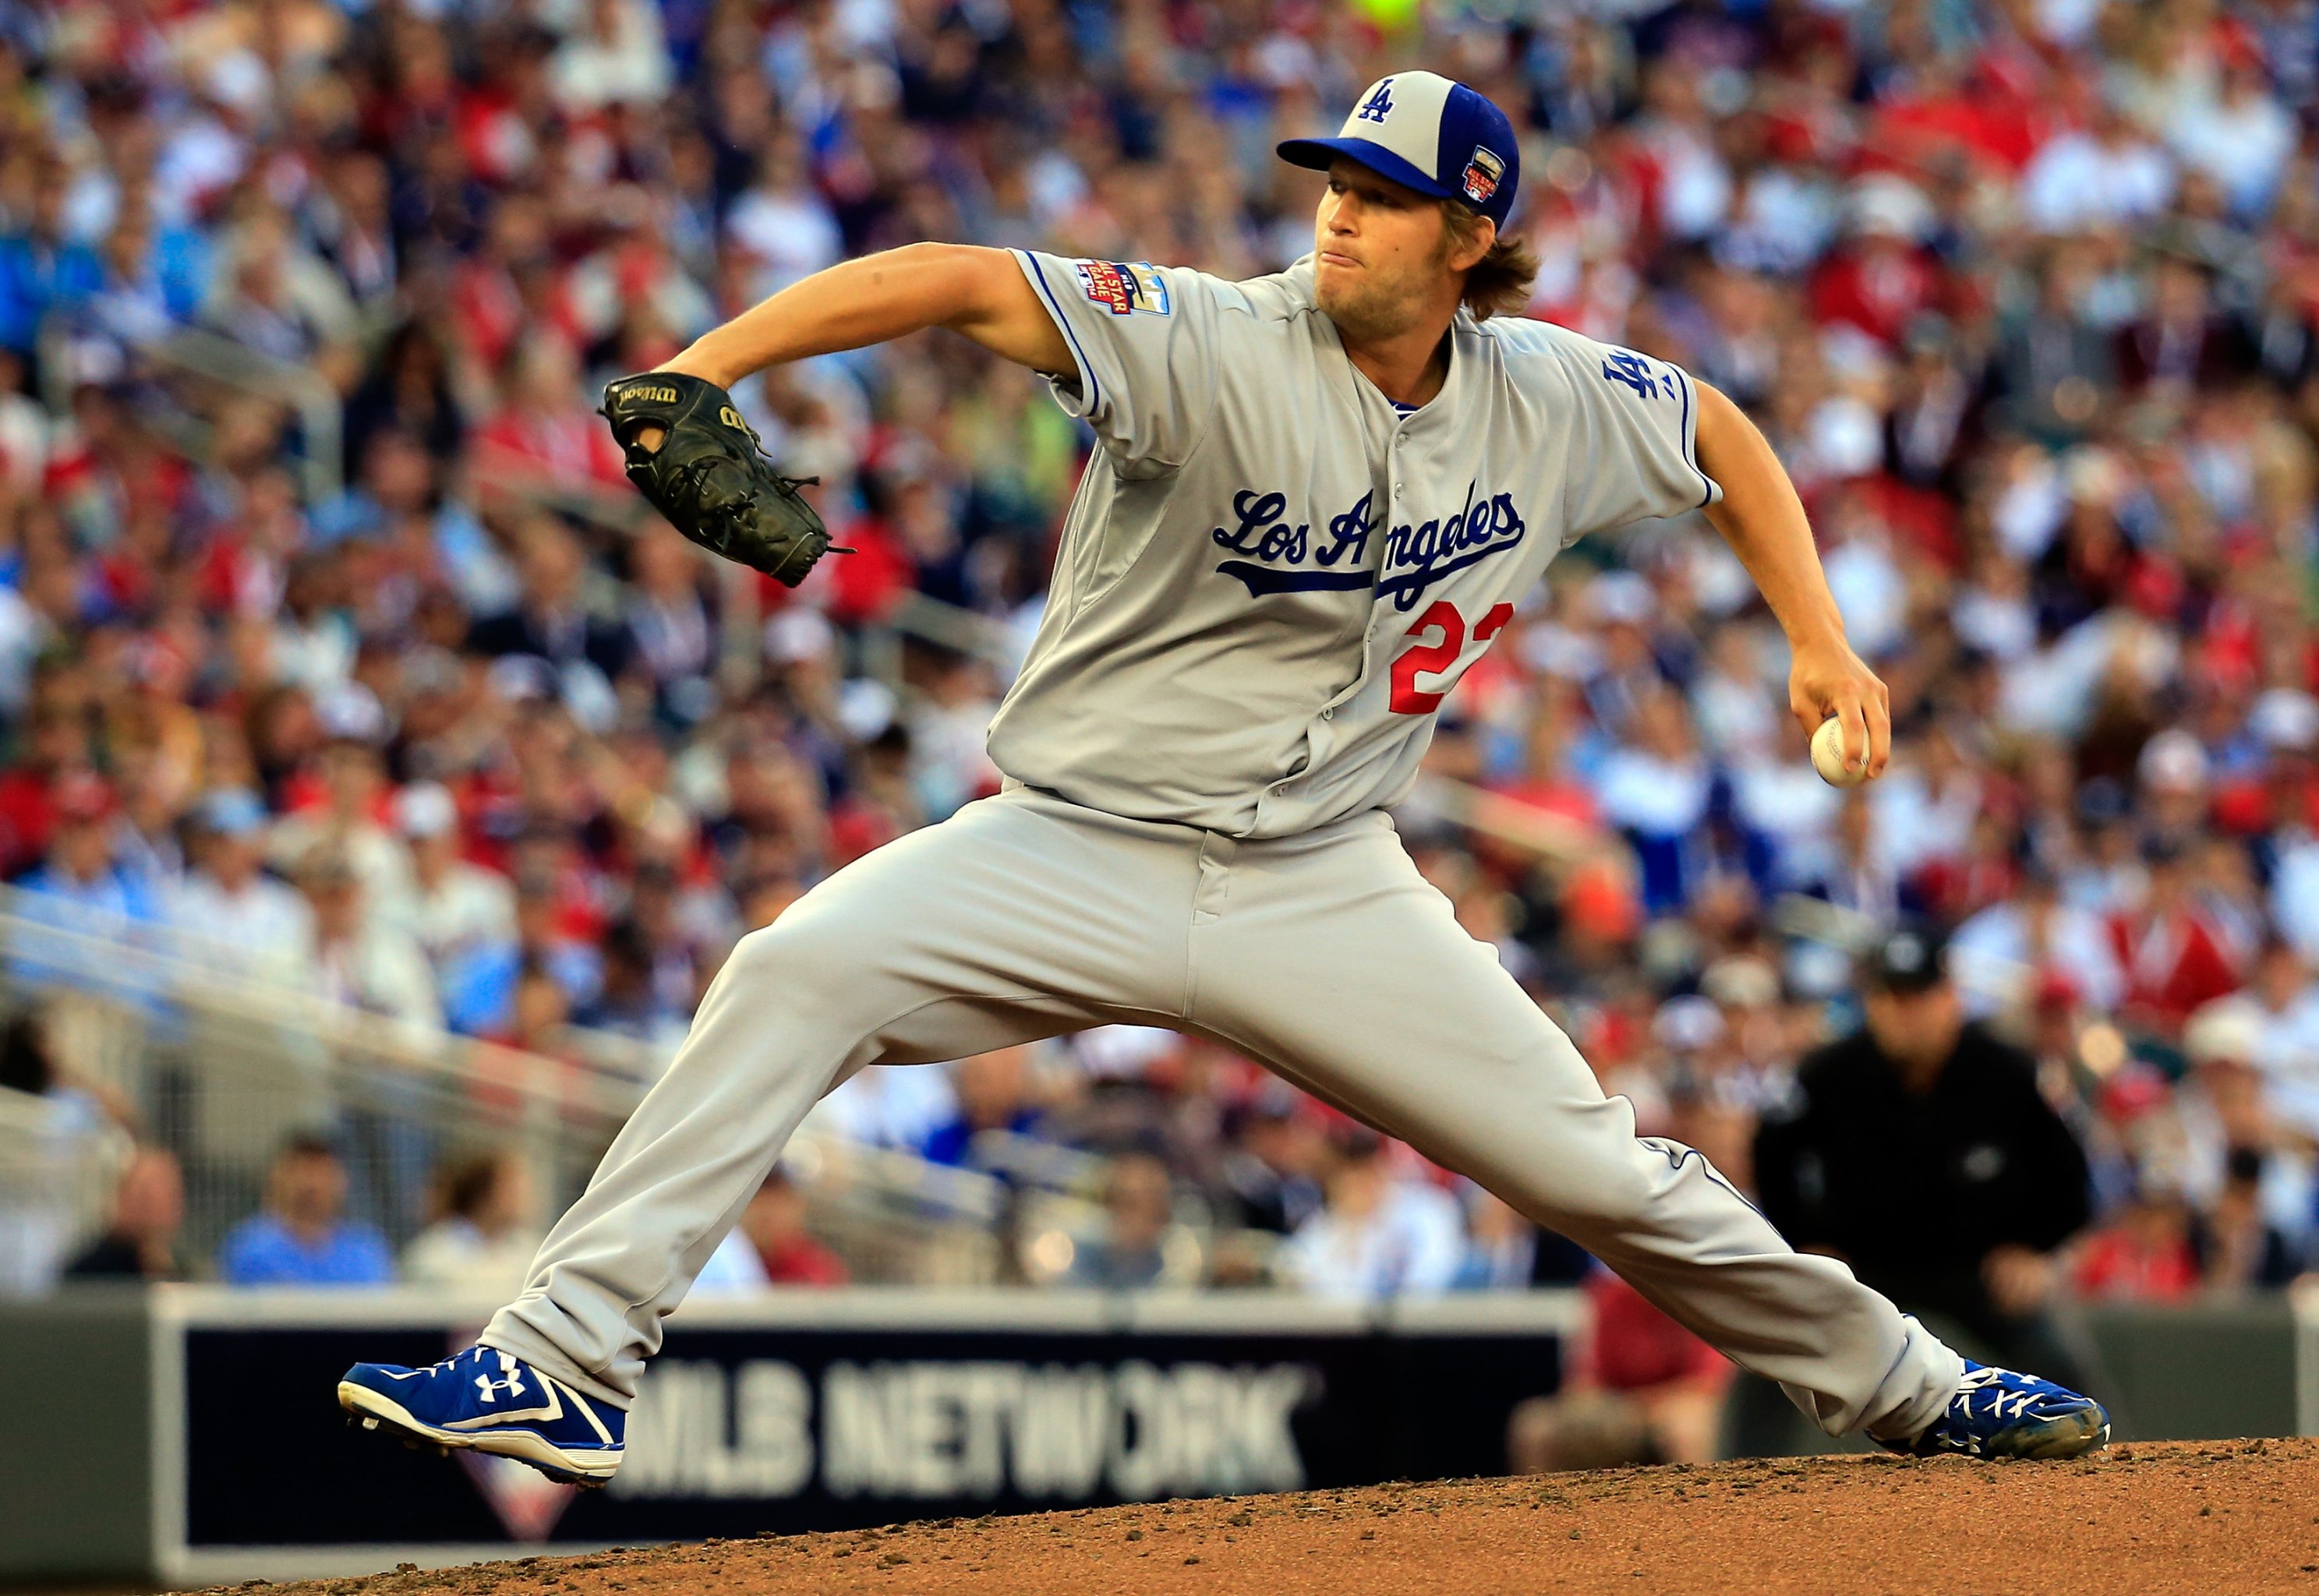 Rovell] JUST IN: Clayton Kershaw, who has been wearing Under